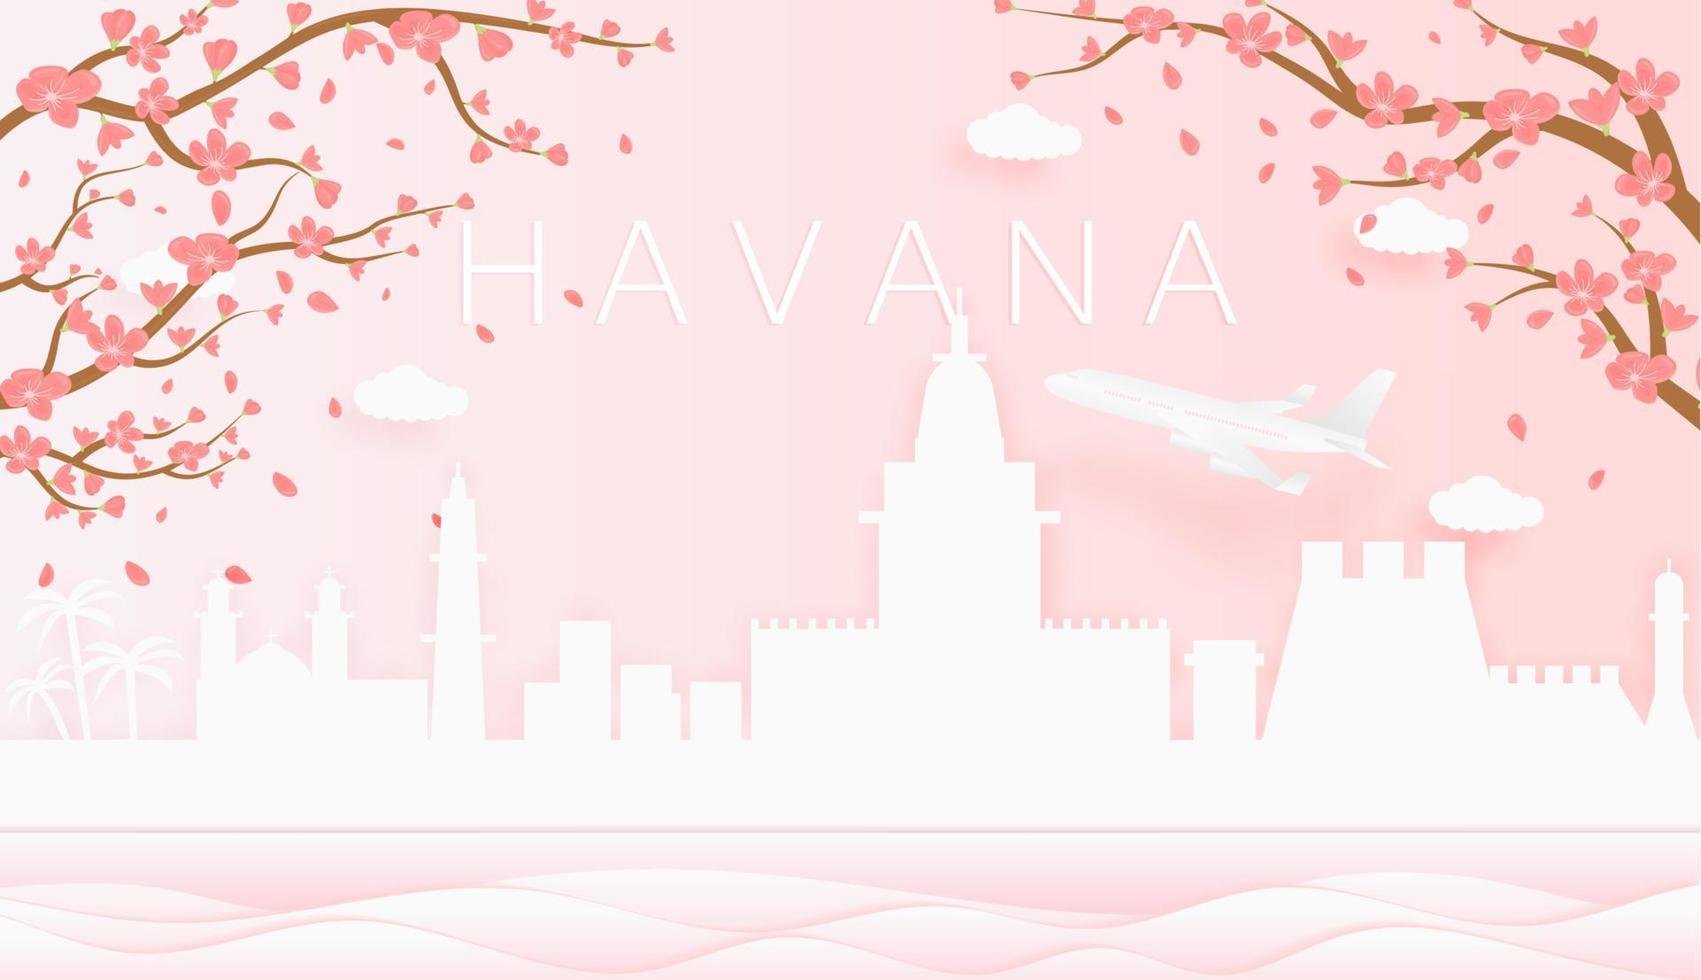 Panorama travel postcard, poster, tour advertising of world famous landmarks of Havana, spring season with blooming flowers in tree vector